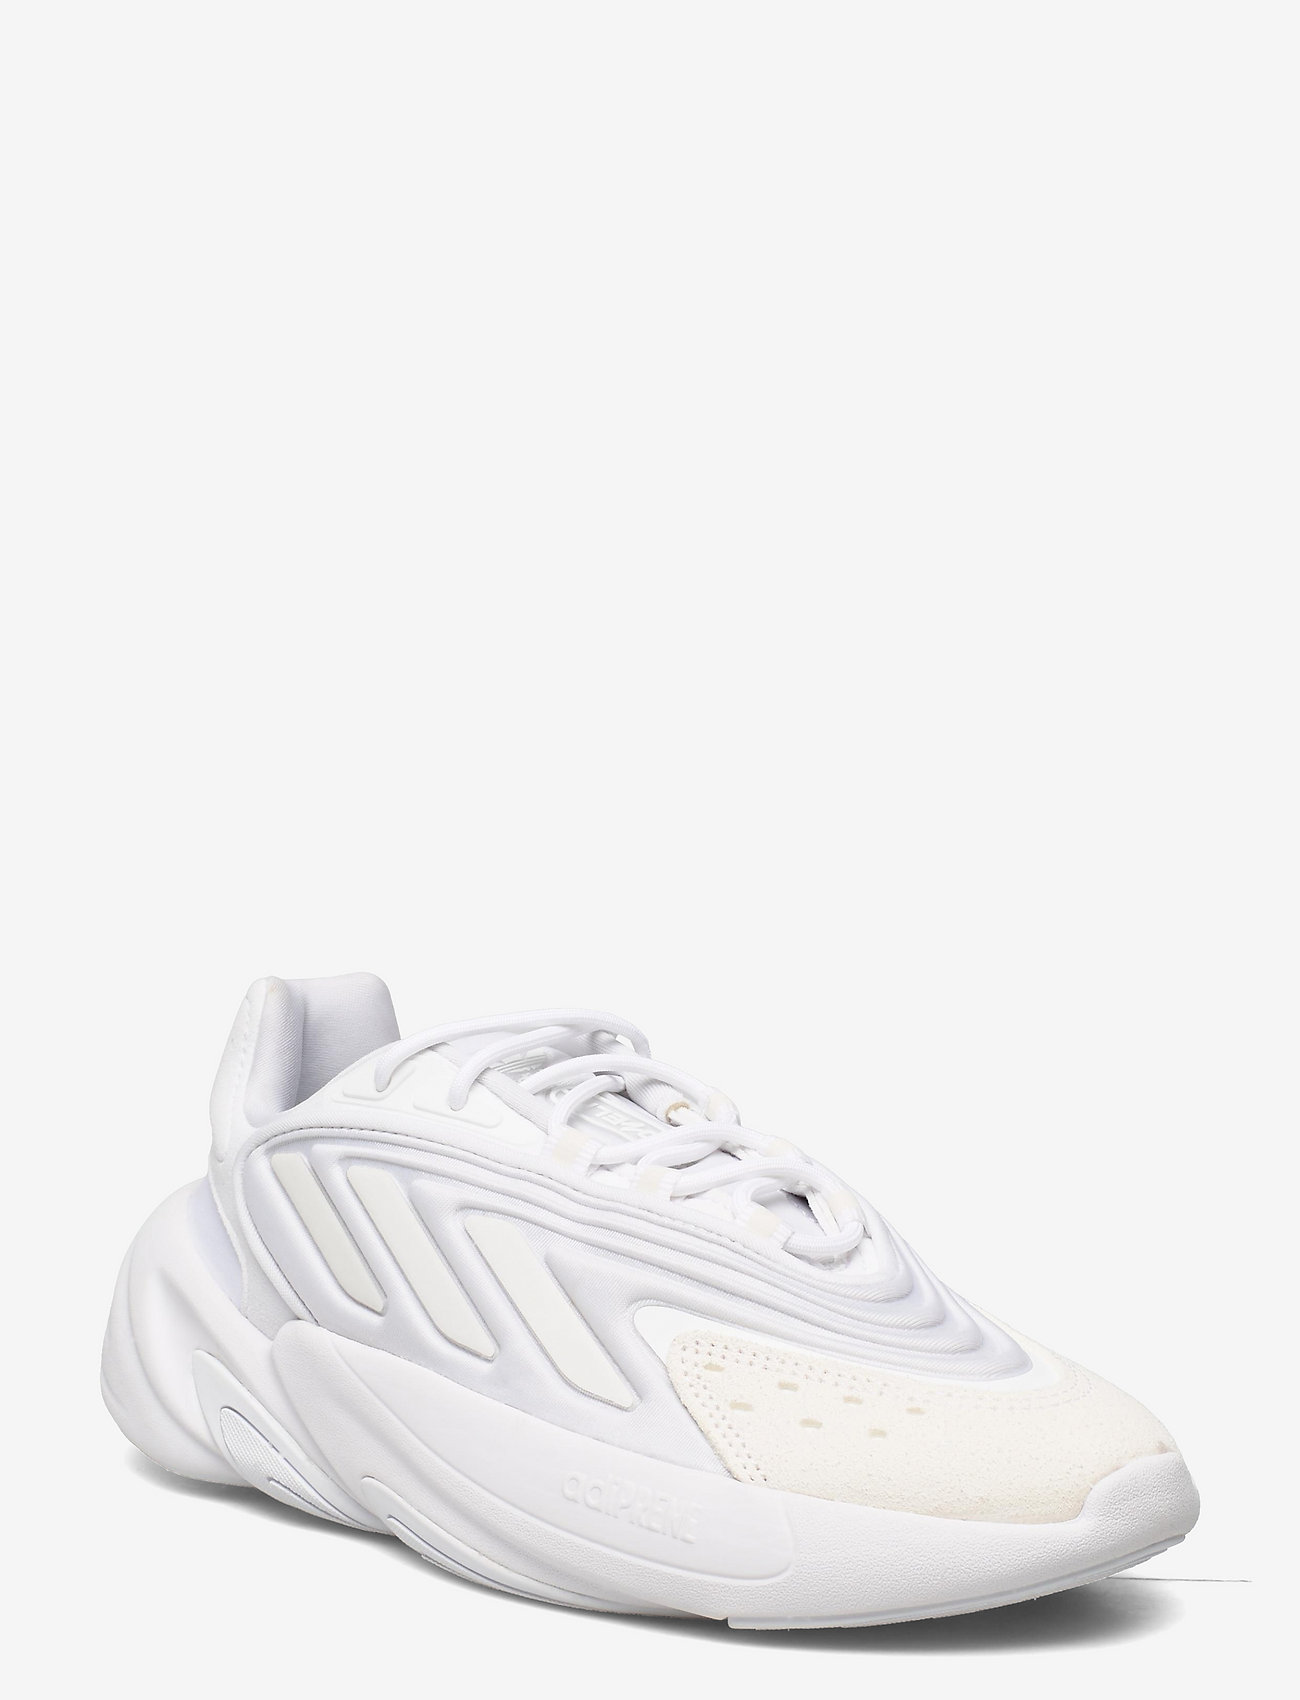 adidas Originals - Ozelia Shoes - chunky sneakers - ftwwht/ftwwht/crywht - 0